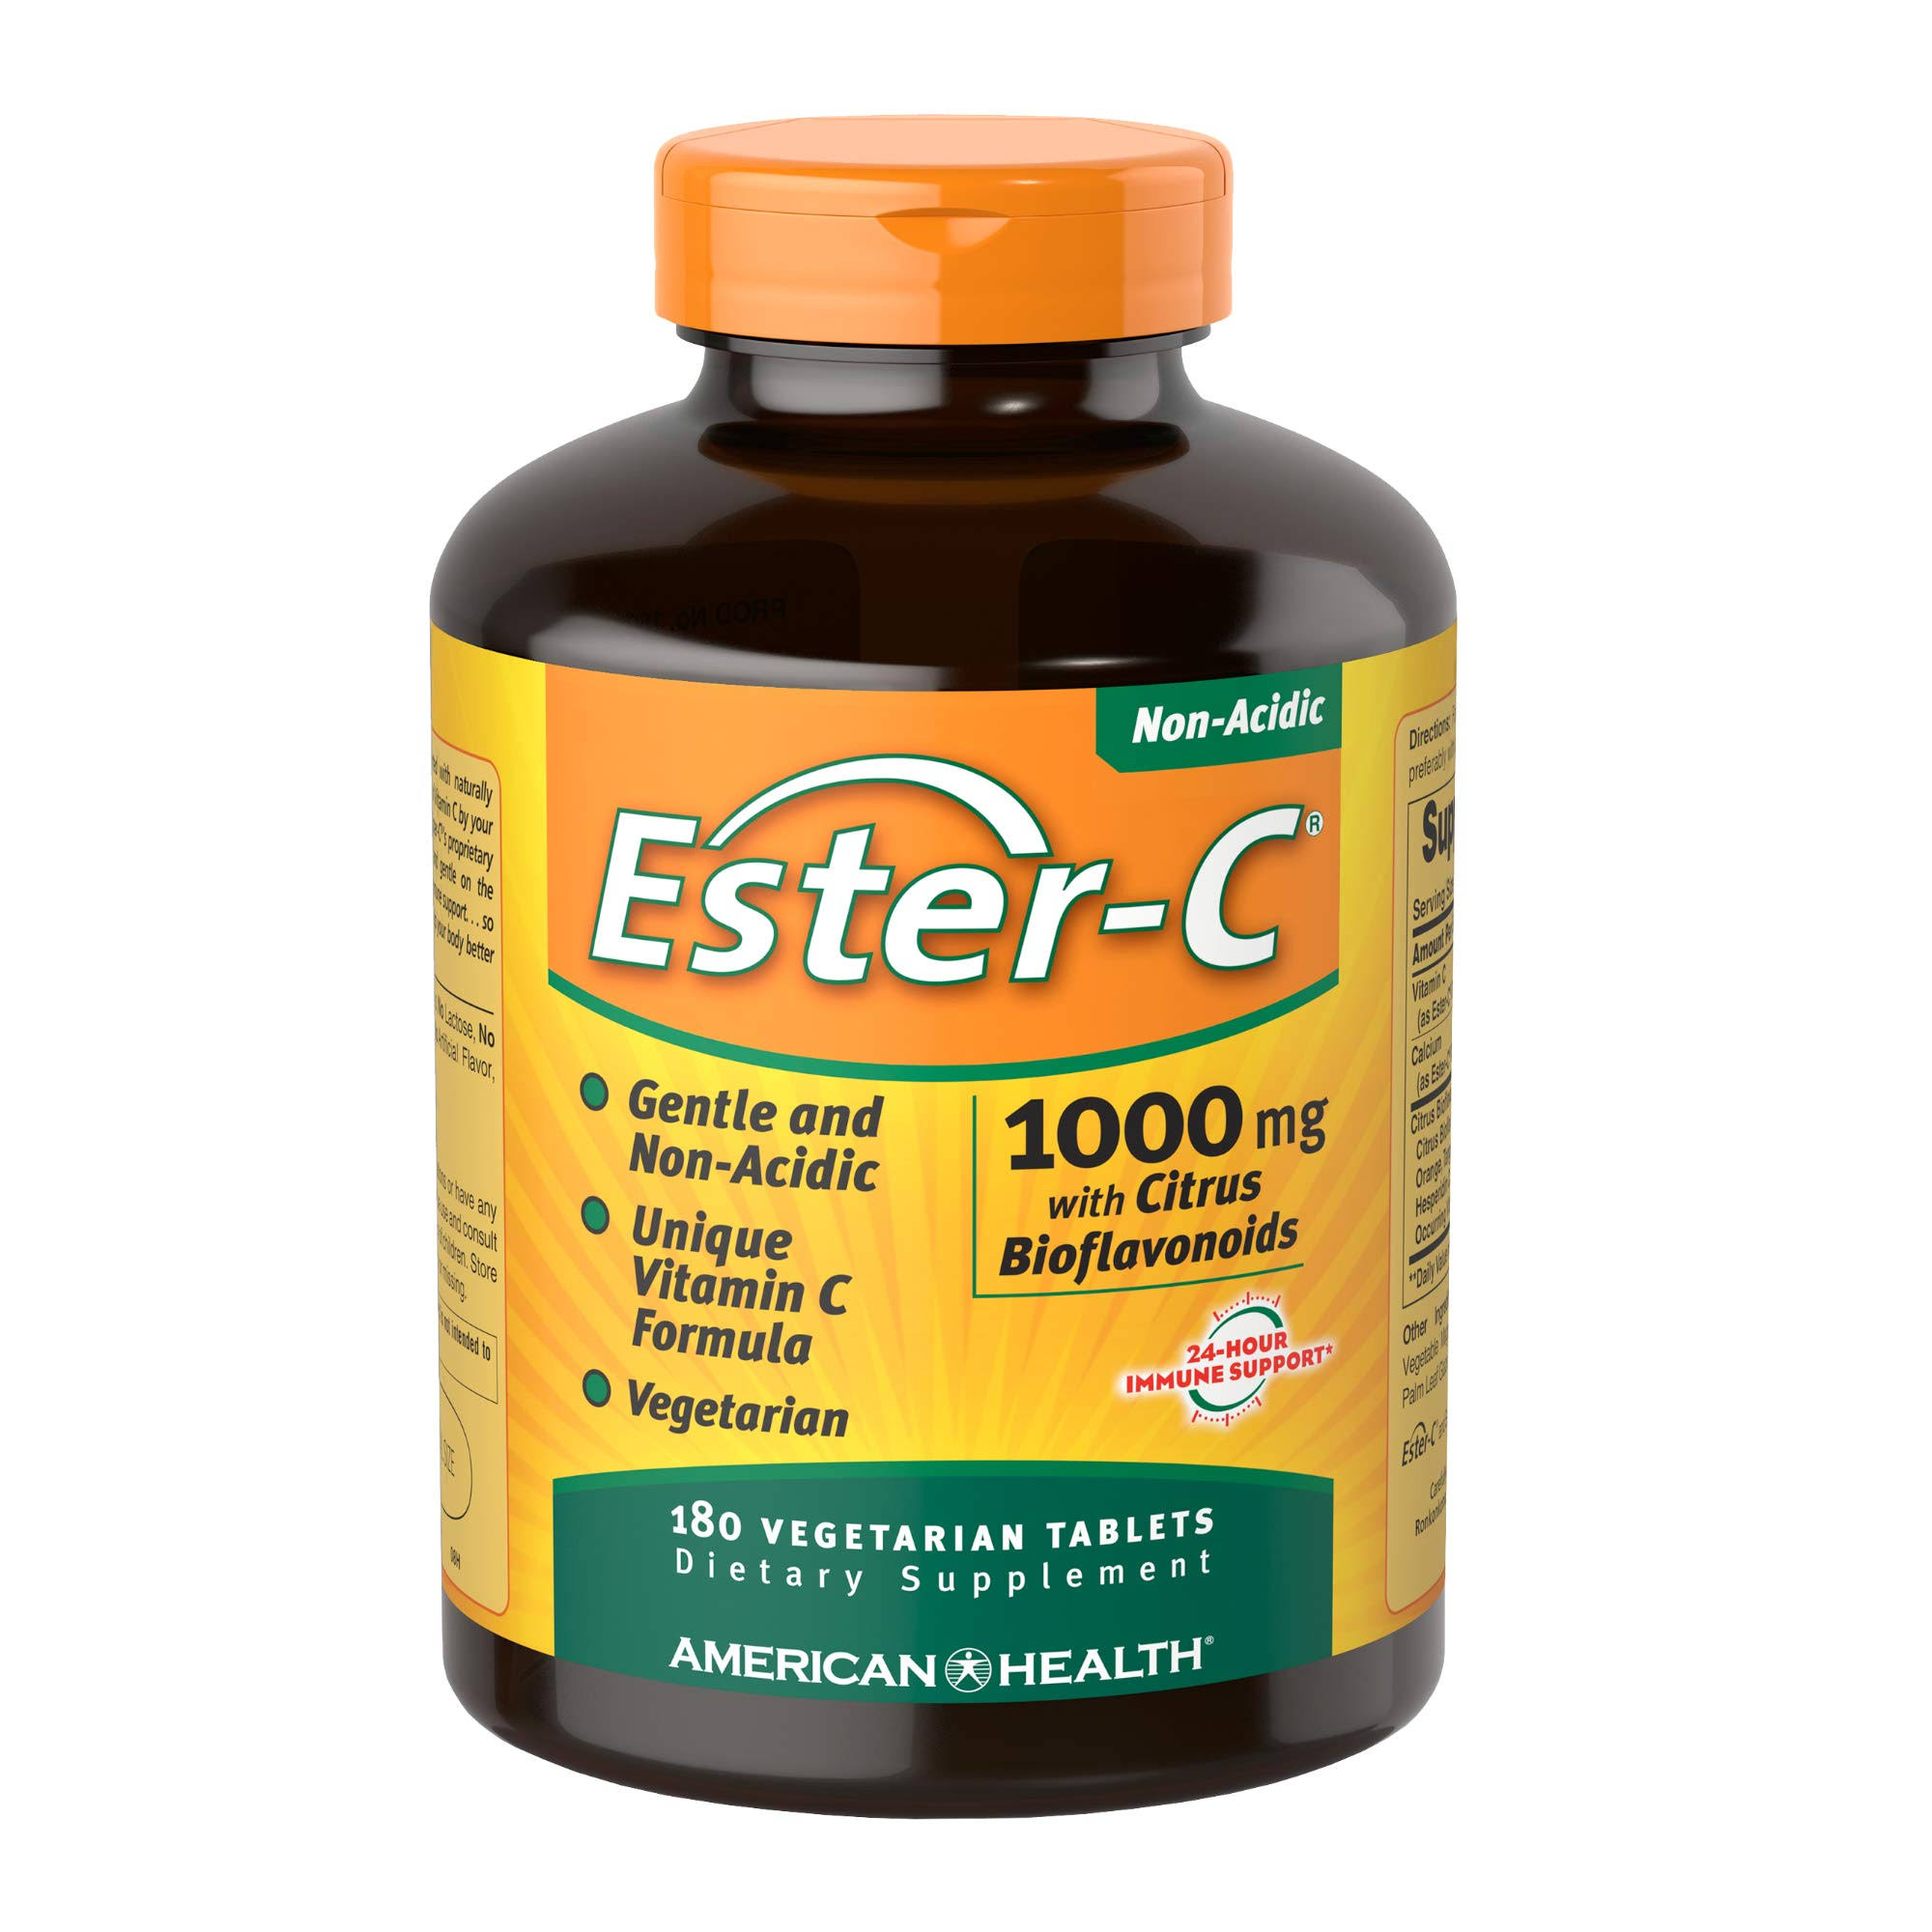 American Health Ester-C with Citrus Bioflavonoids - 1000mg, 180 Vegetarian Tablets